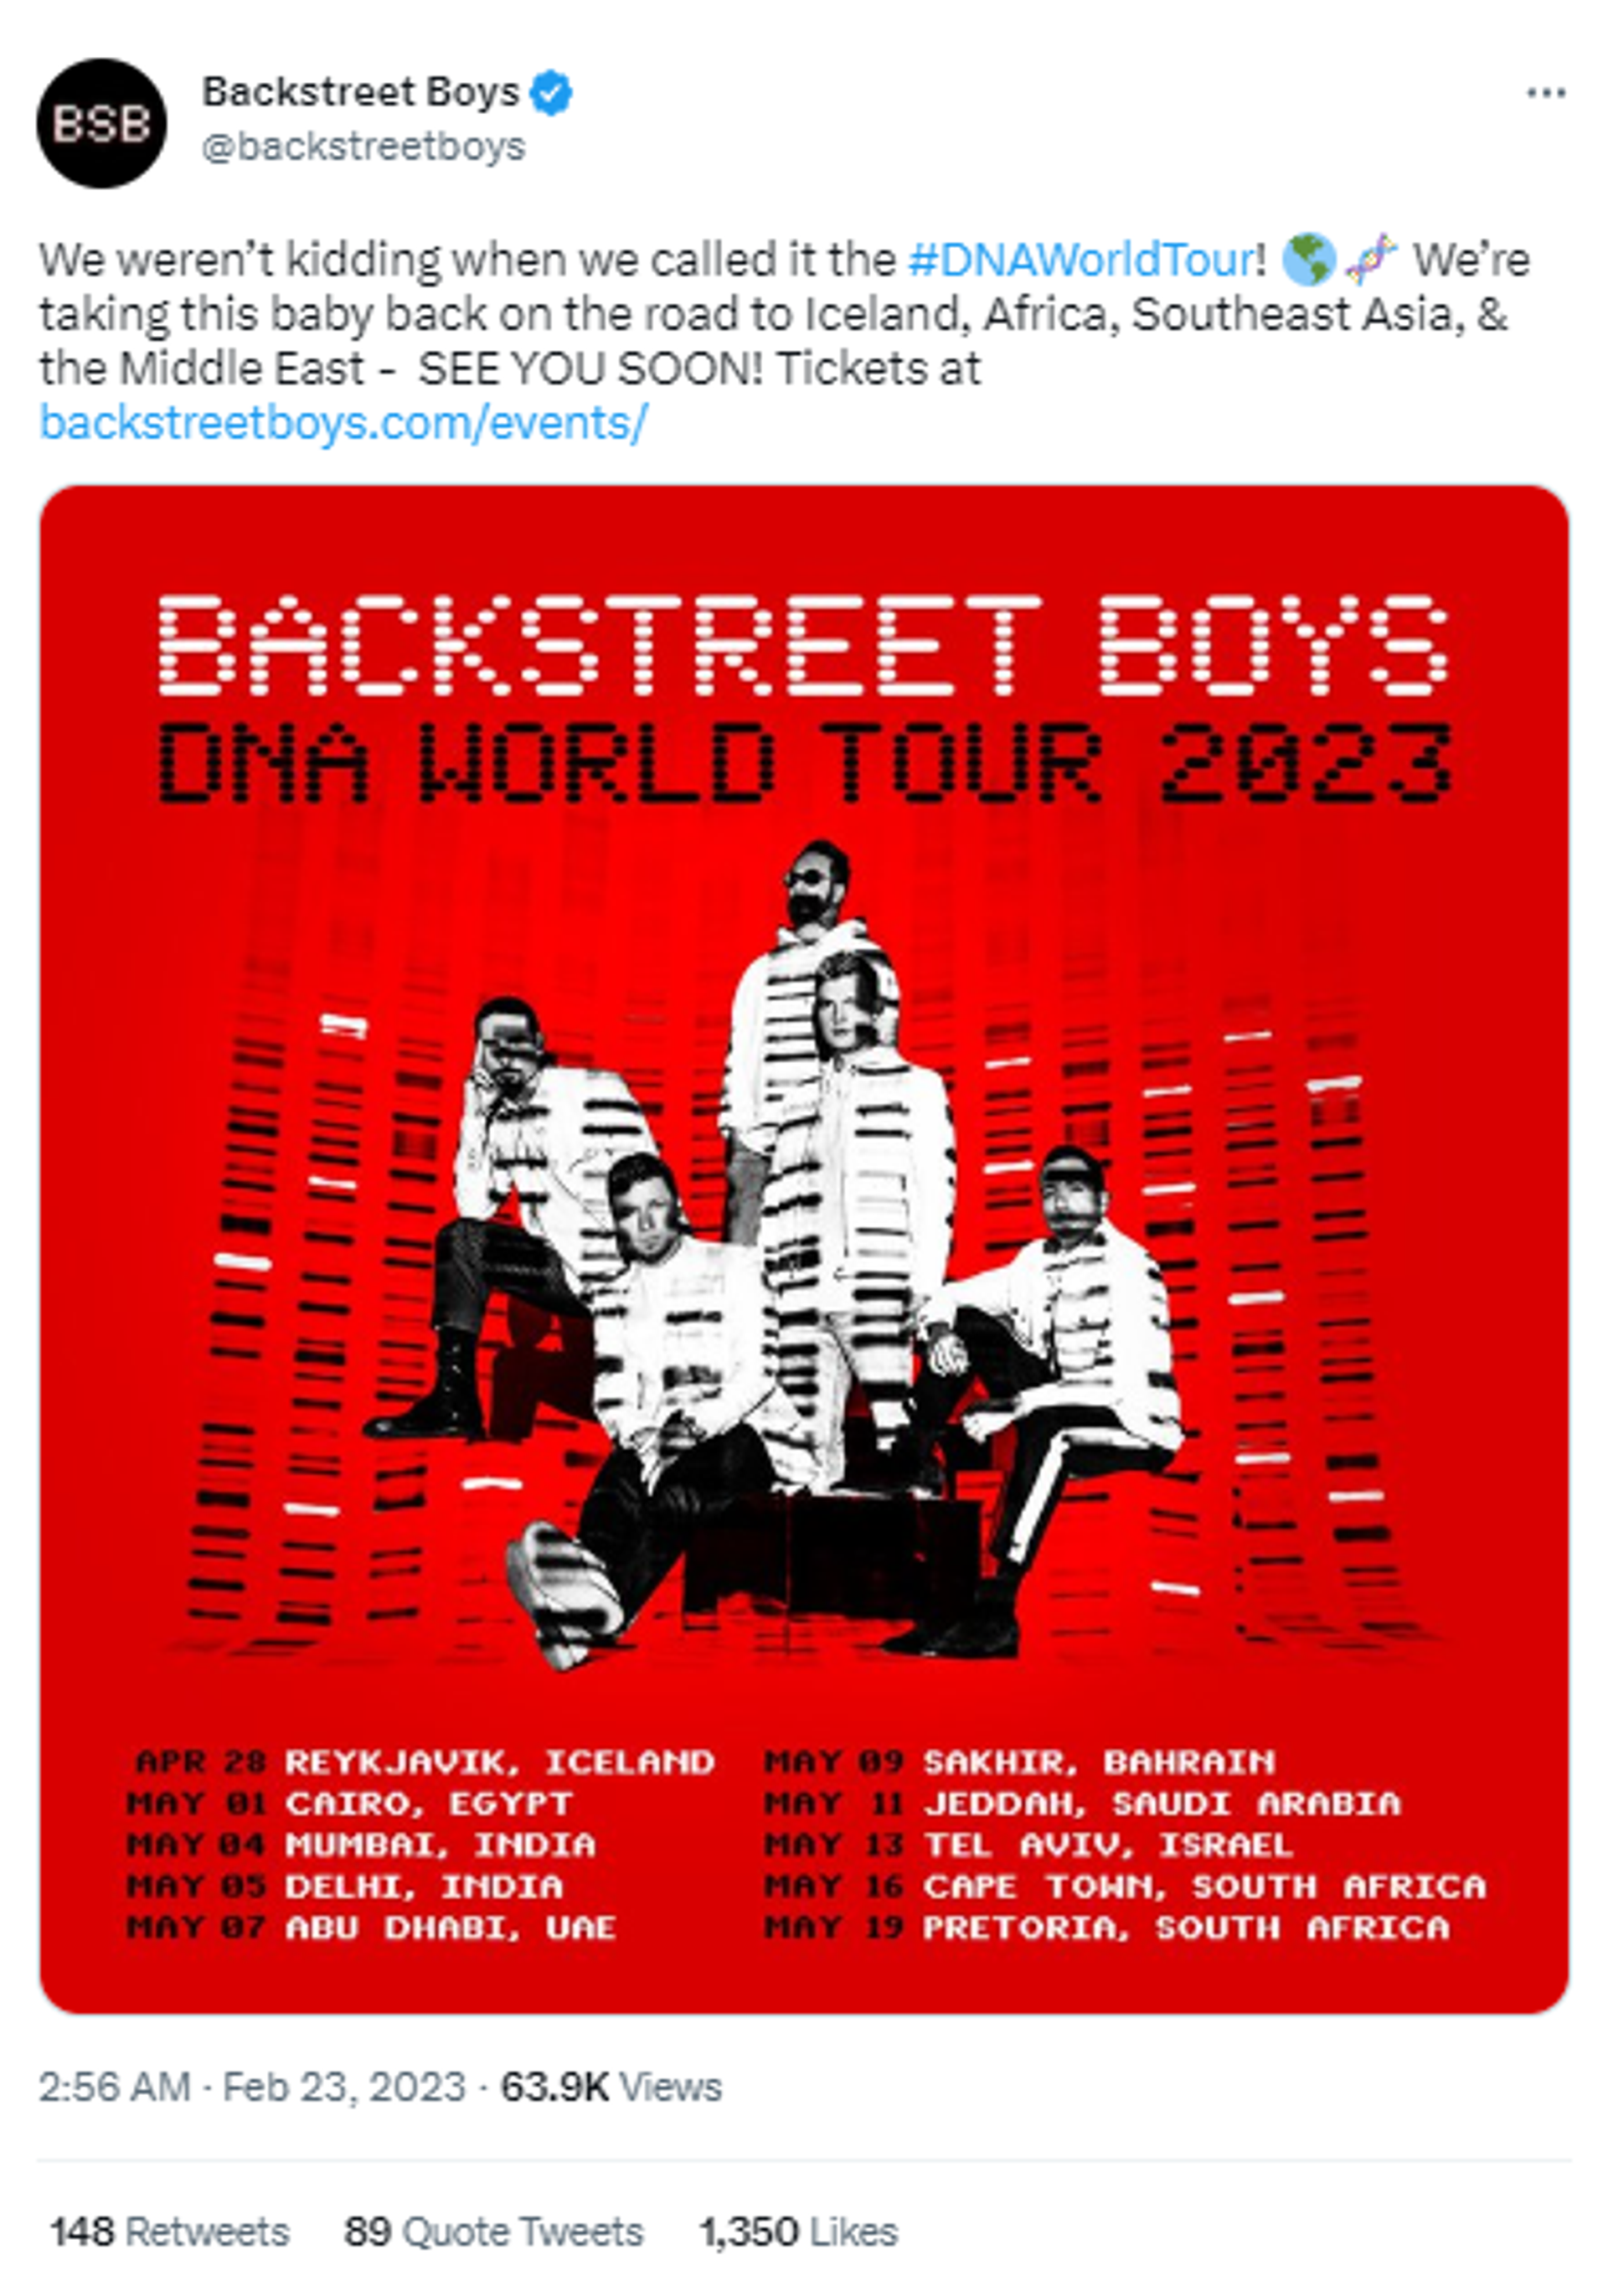 Iconic boy band, Backstreet Boys announces dates of their upcoming DNA World Tour starting from 1 May 2023. - Sputnik India, 1920, 23.02.2023